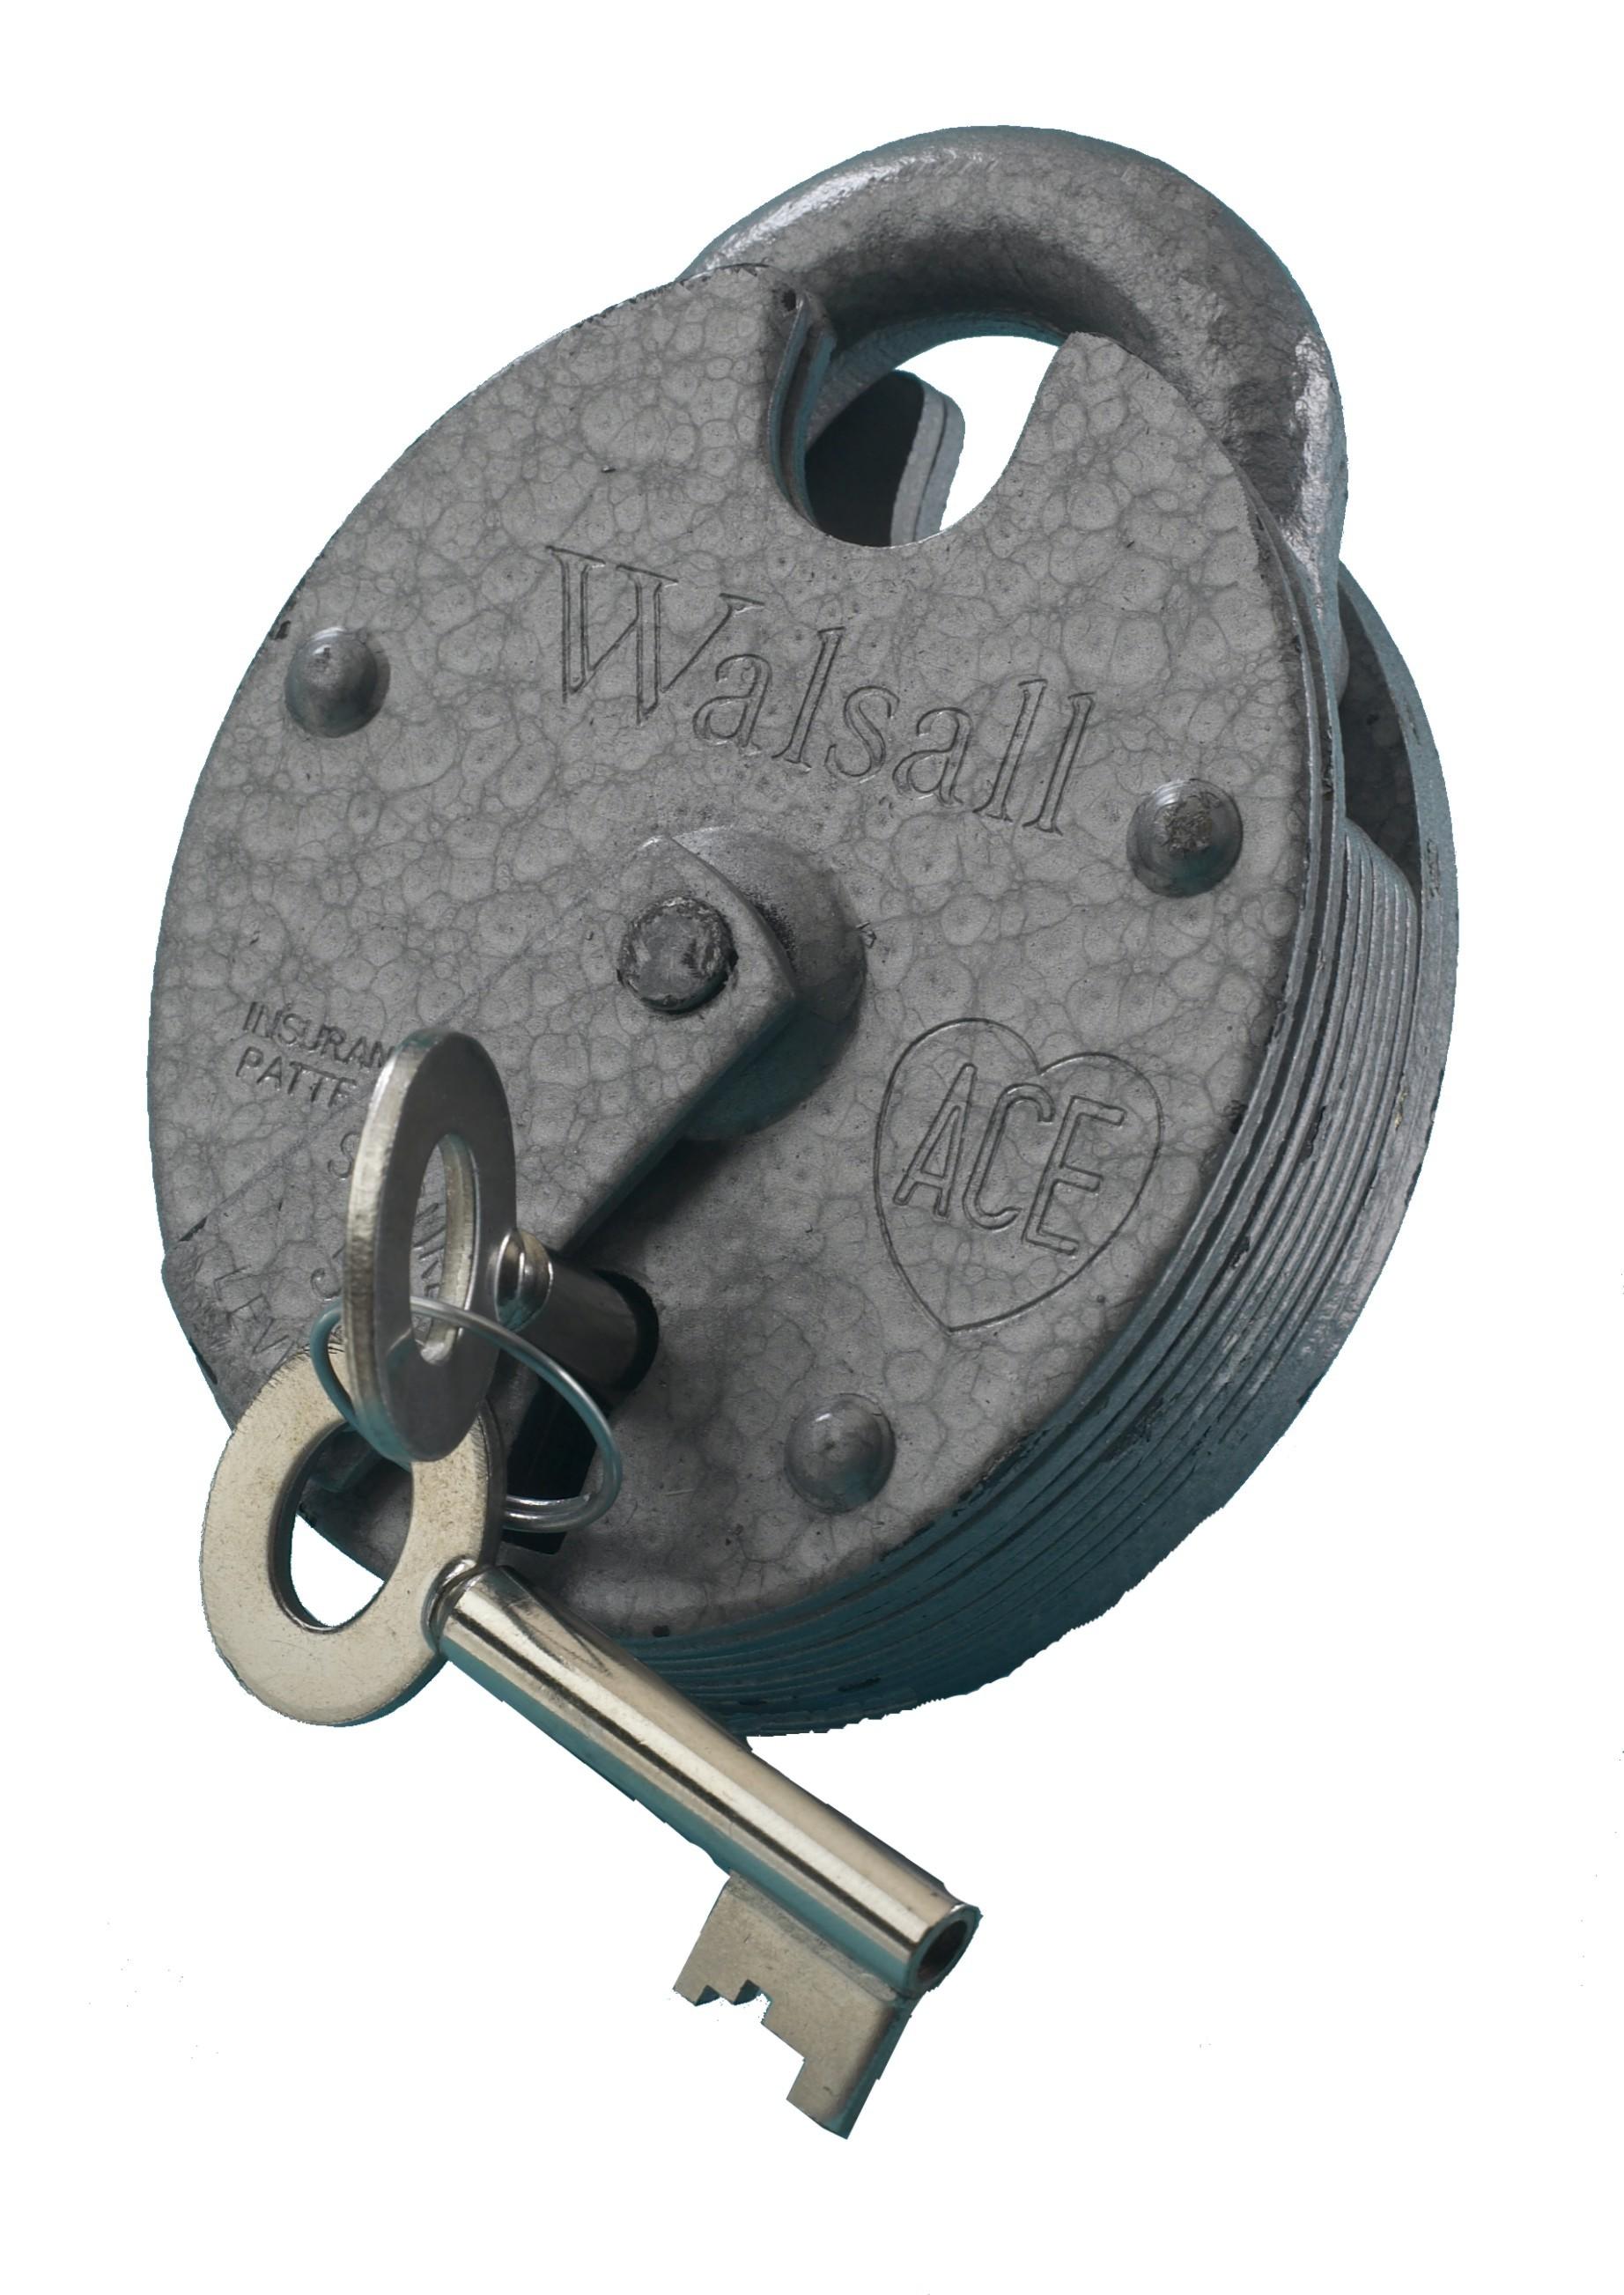 Walsall 2000 Vintage Style Steel & Stainless Shrouded Shackle Padlock Made in UK 